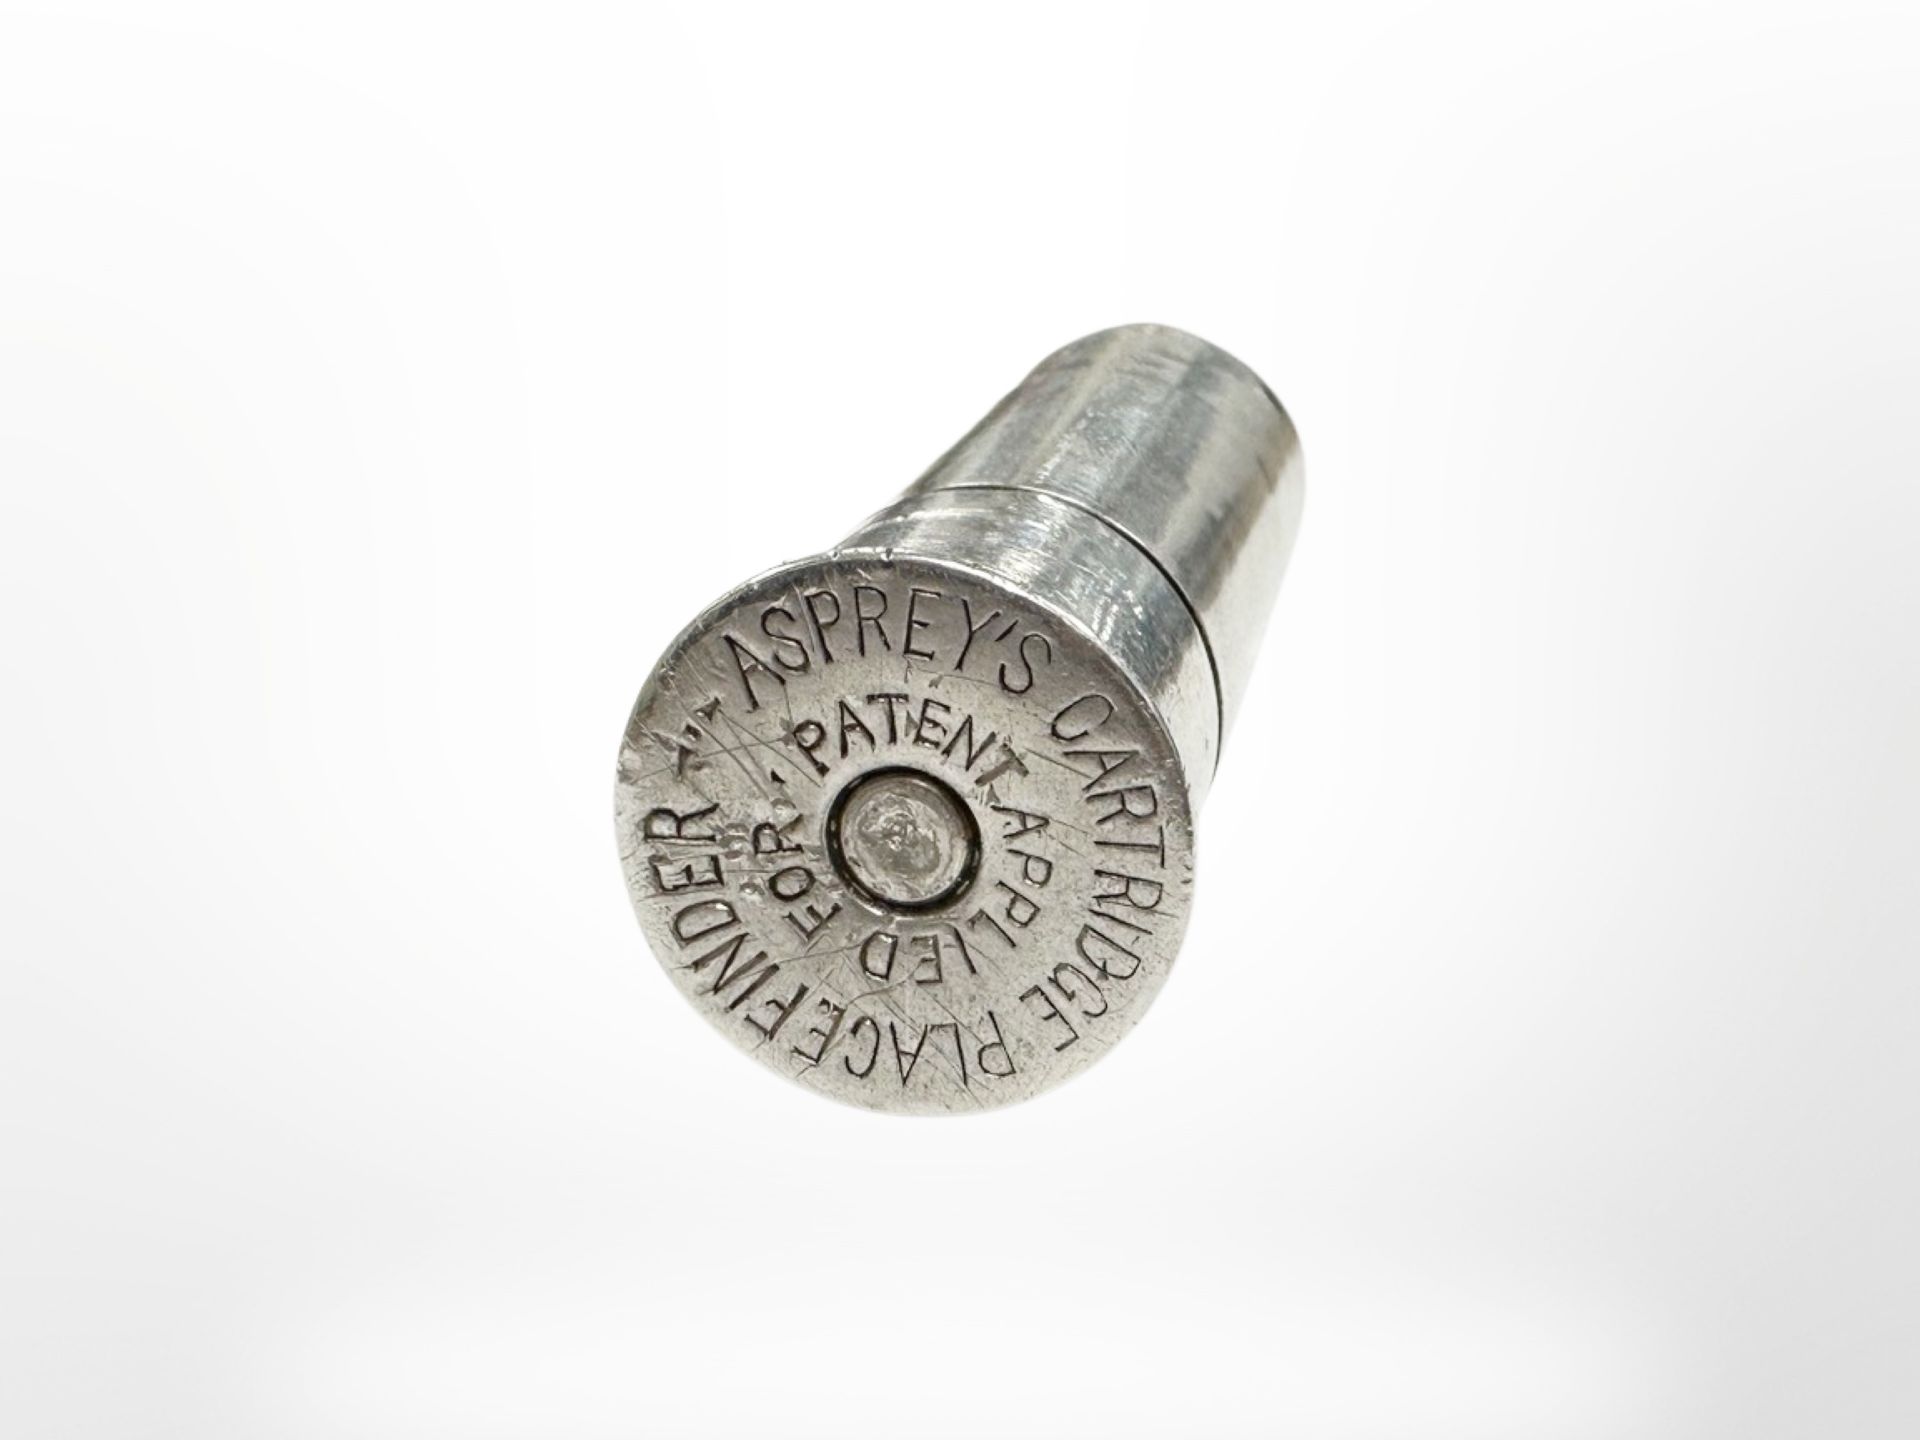 An early 20th century Asprey's Cartridge place finder, - Image 3 of 6